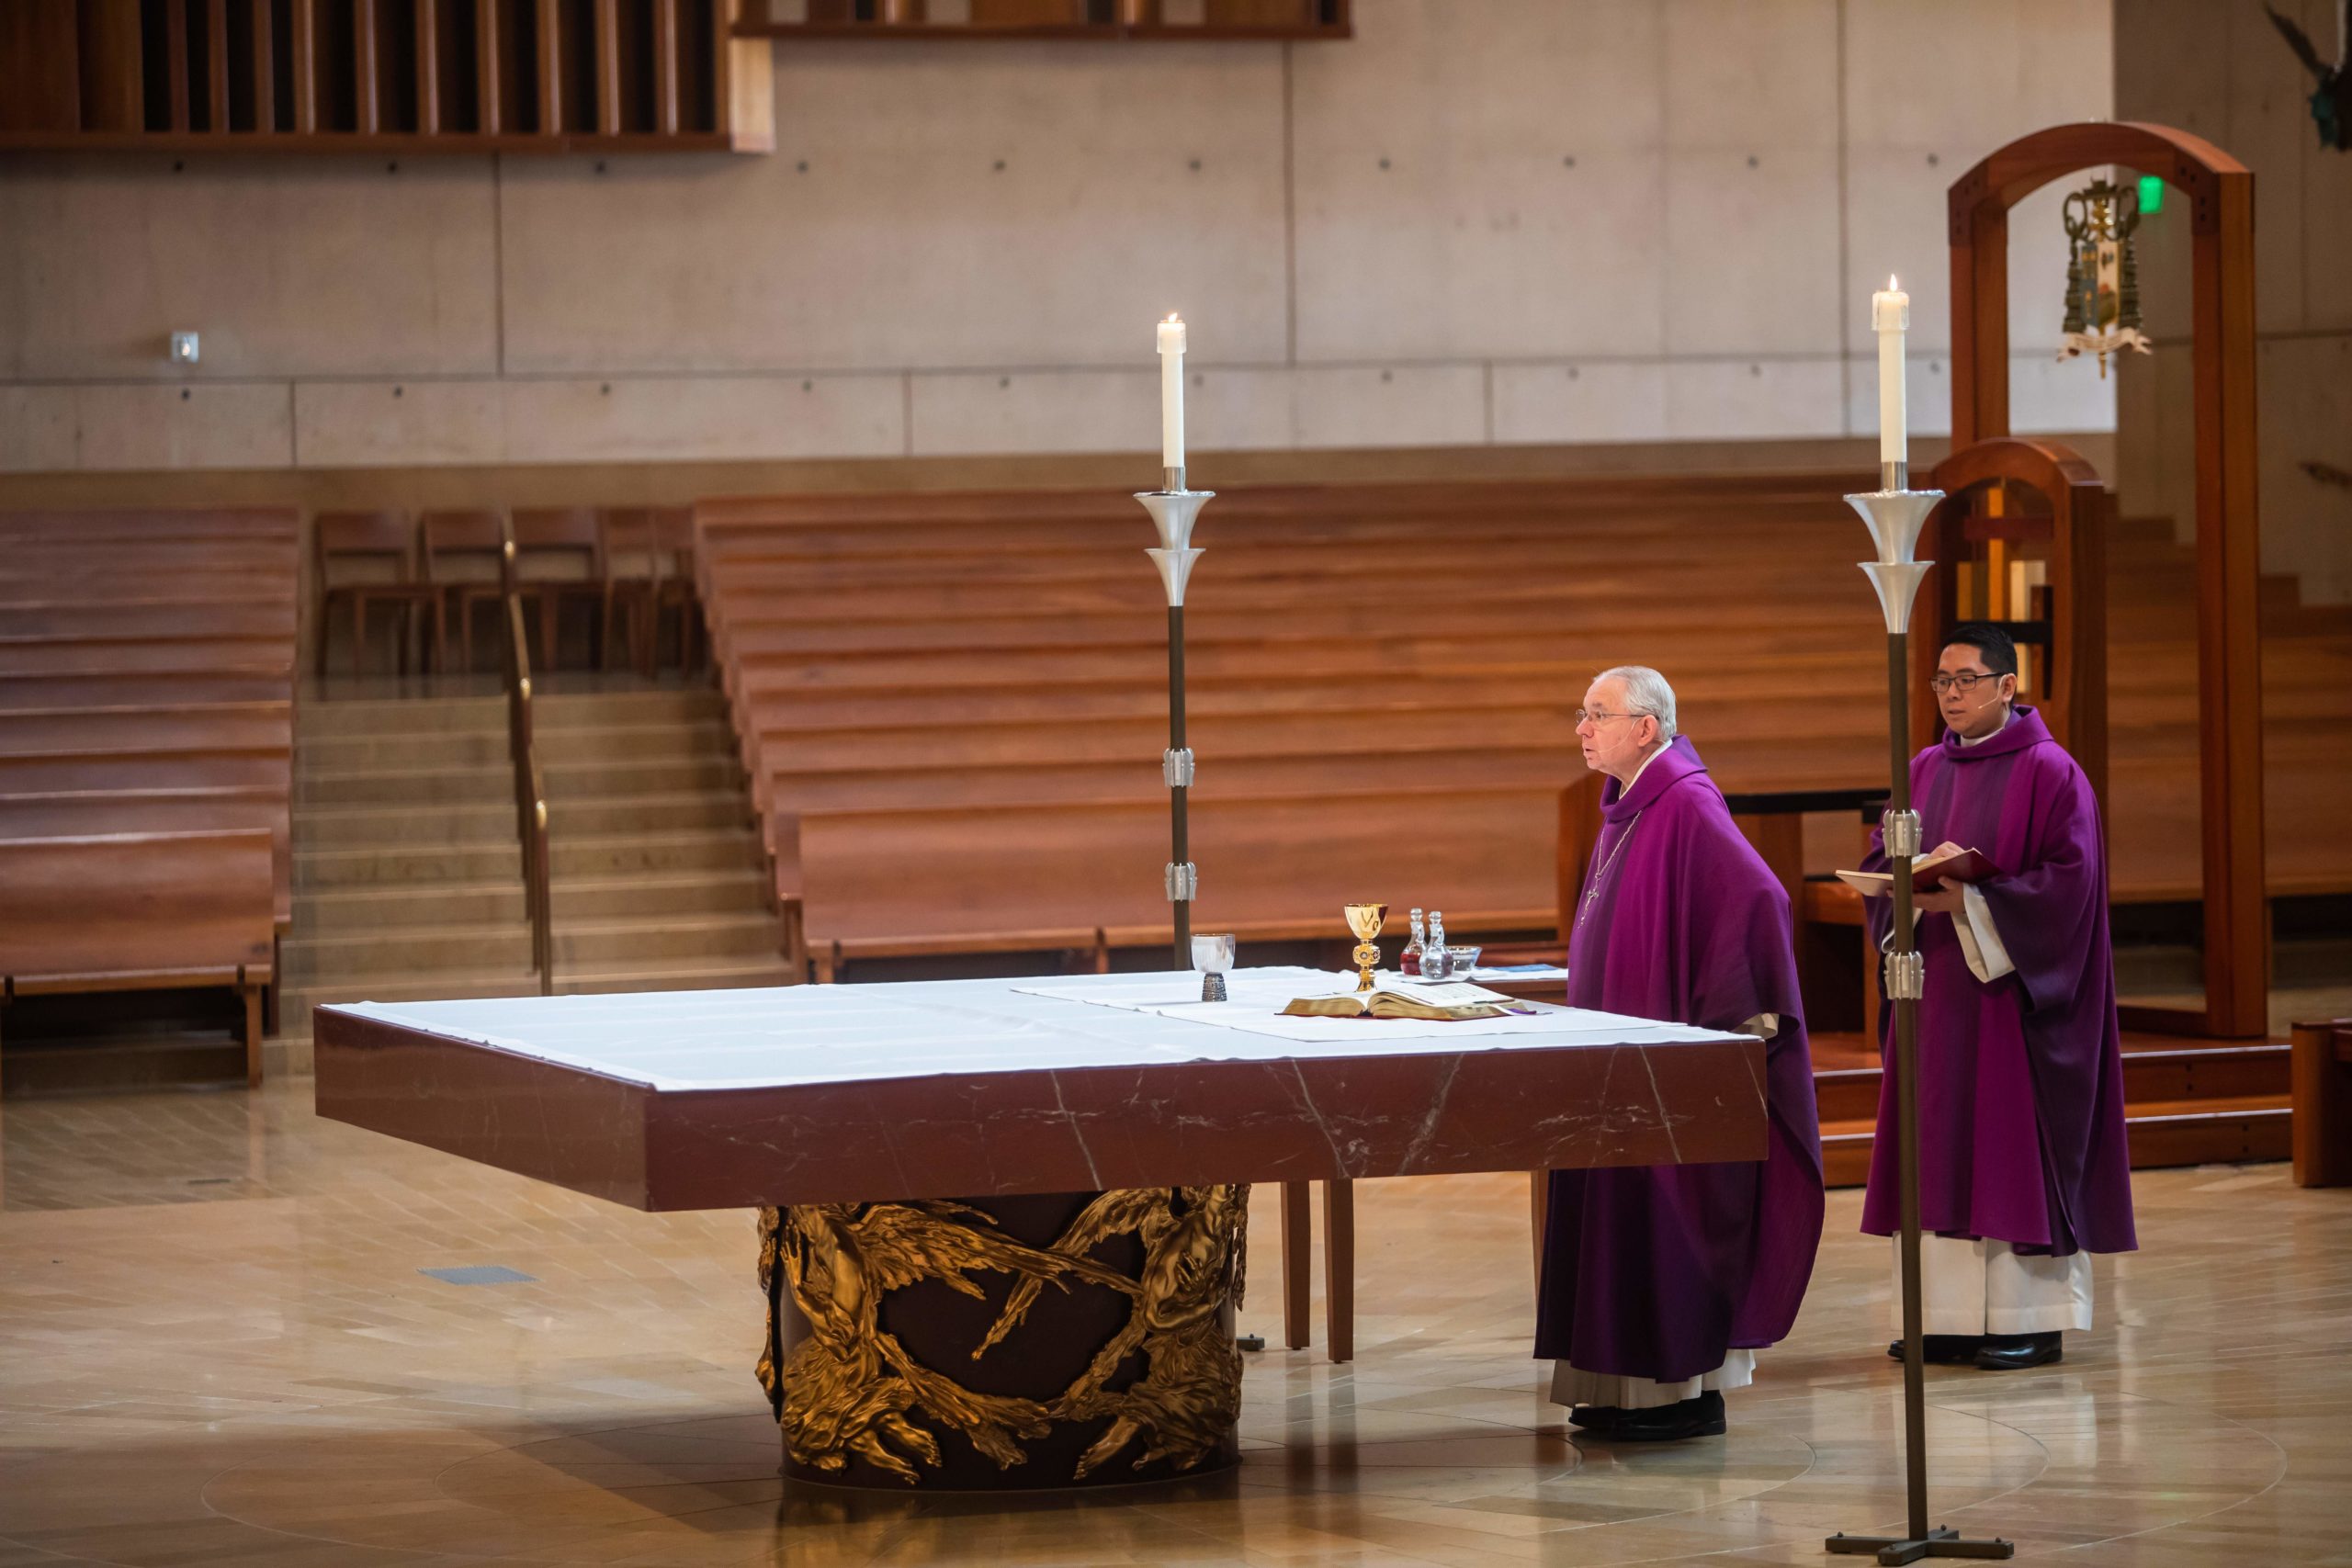 USCCB President Archbishop Jose Gomez celebrates mass on March 22, 2020 in Los Angeles, California. (Apu Gomes/AFP via Getty Images)